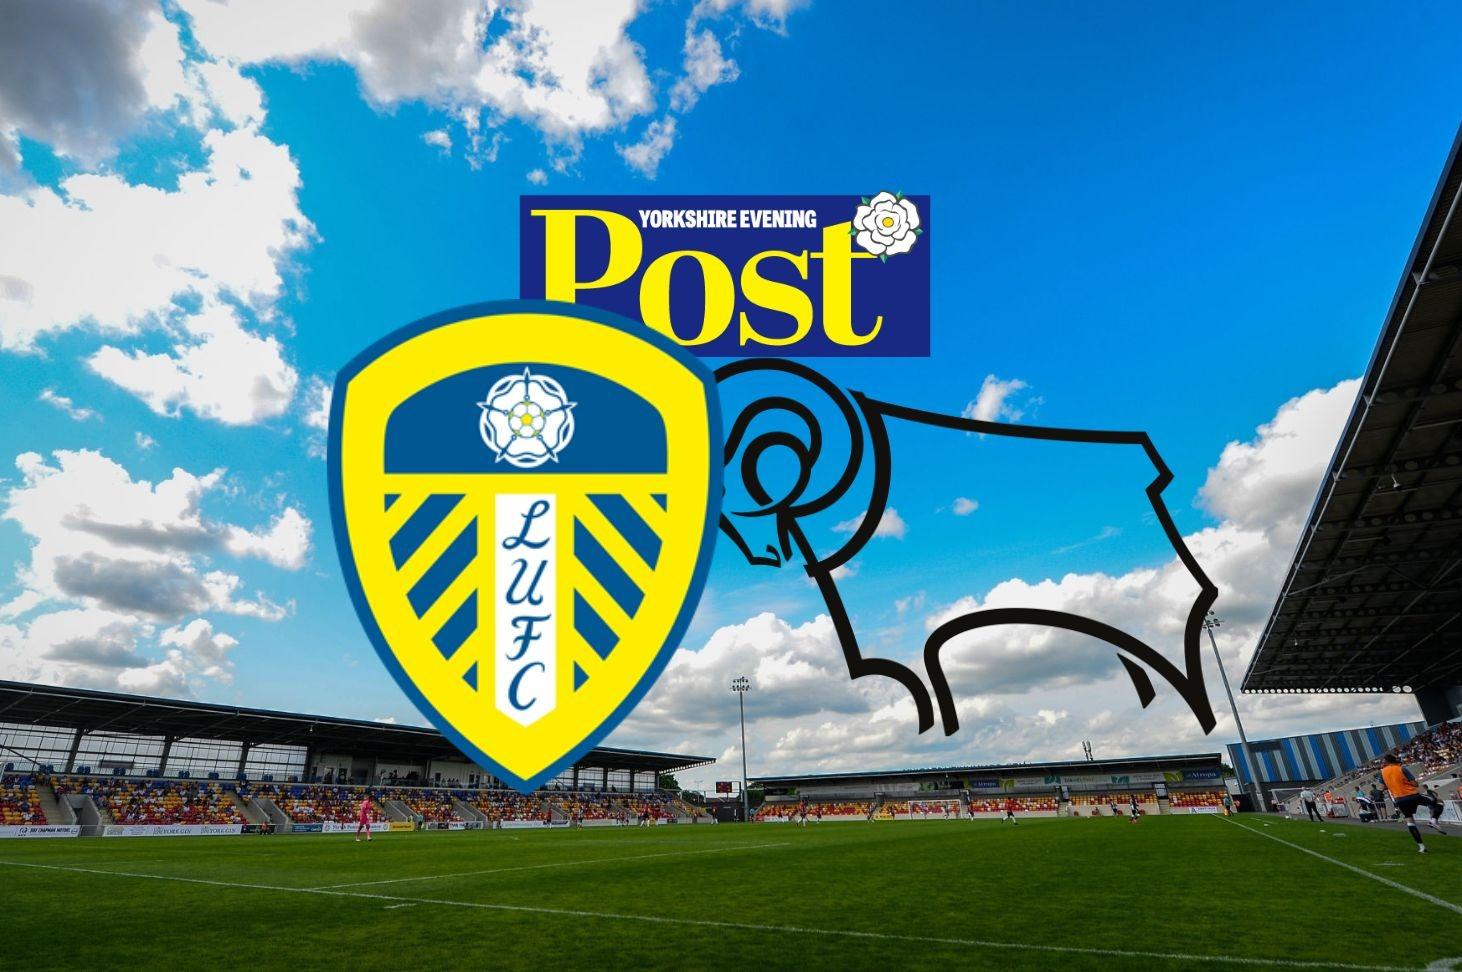 Leeds United U21s 3-0 Derby County U21s highlights: Perkins goal contributions hat-trick as Gray | Yorkshire Evening Post